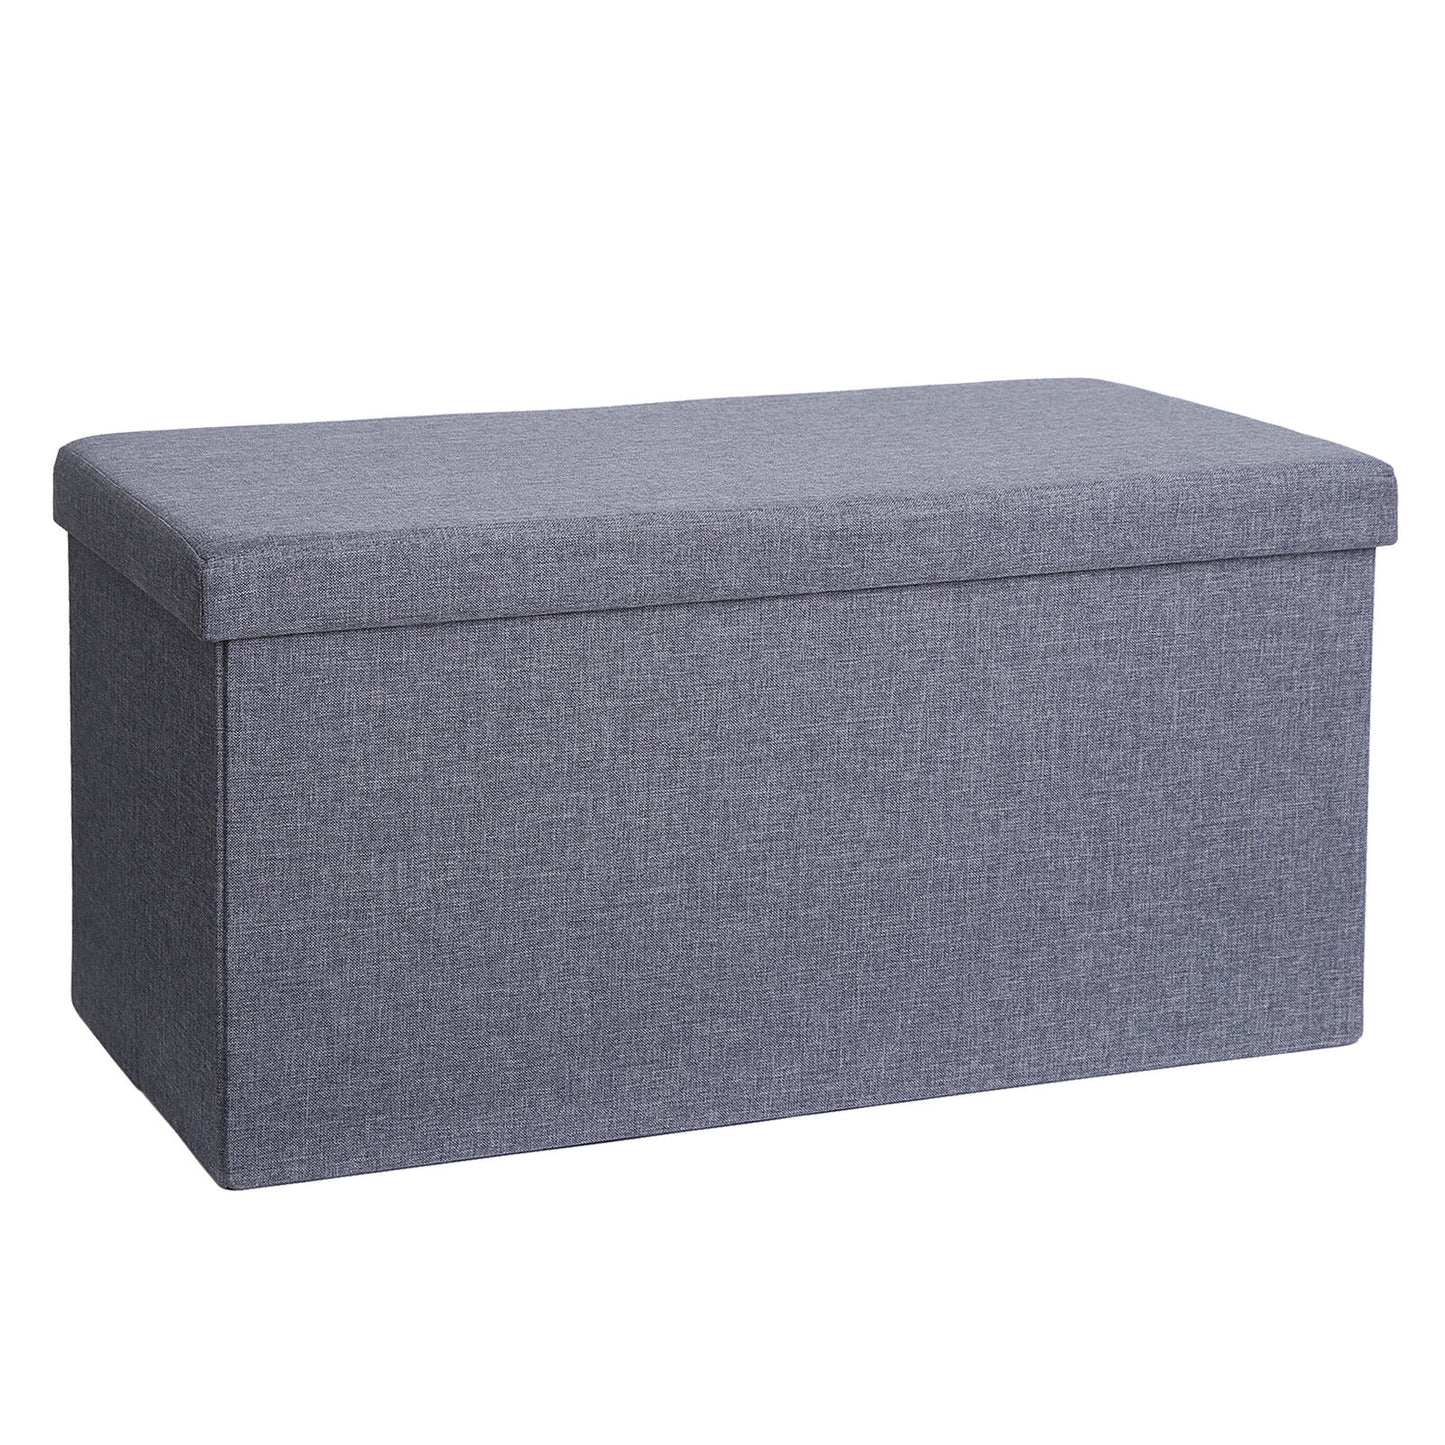 30" Folding Storage Ottoman Bench Footstool Toy Chest Holds Up To 550 LBS W/Lid